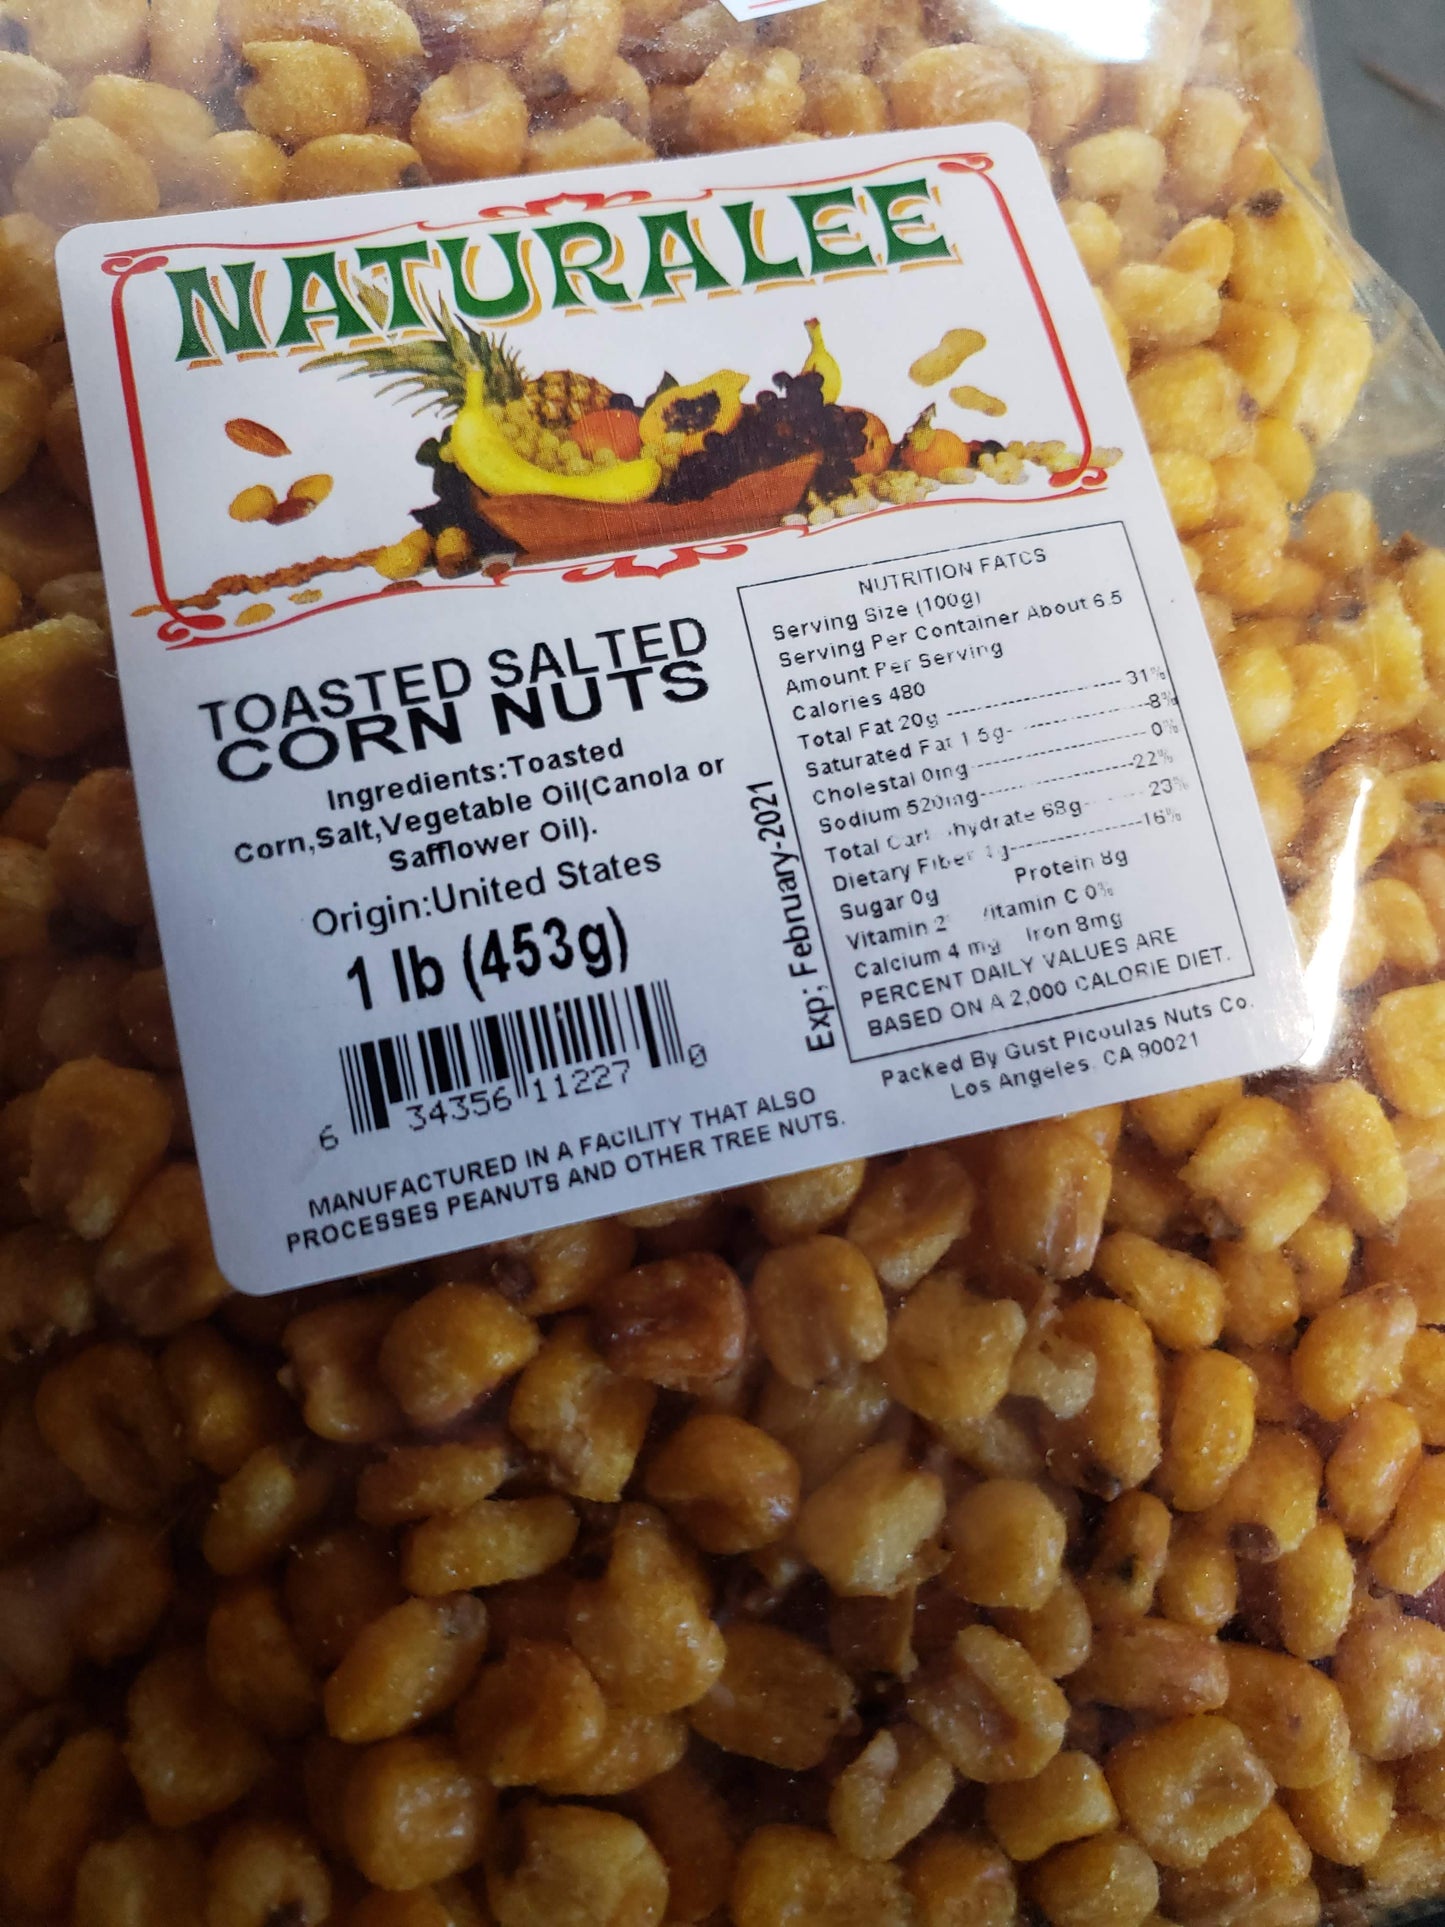 Toasted Salted Corn Nuts